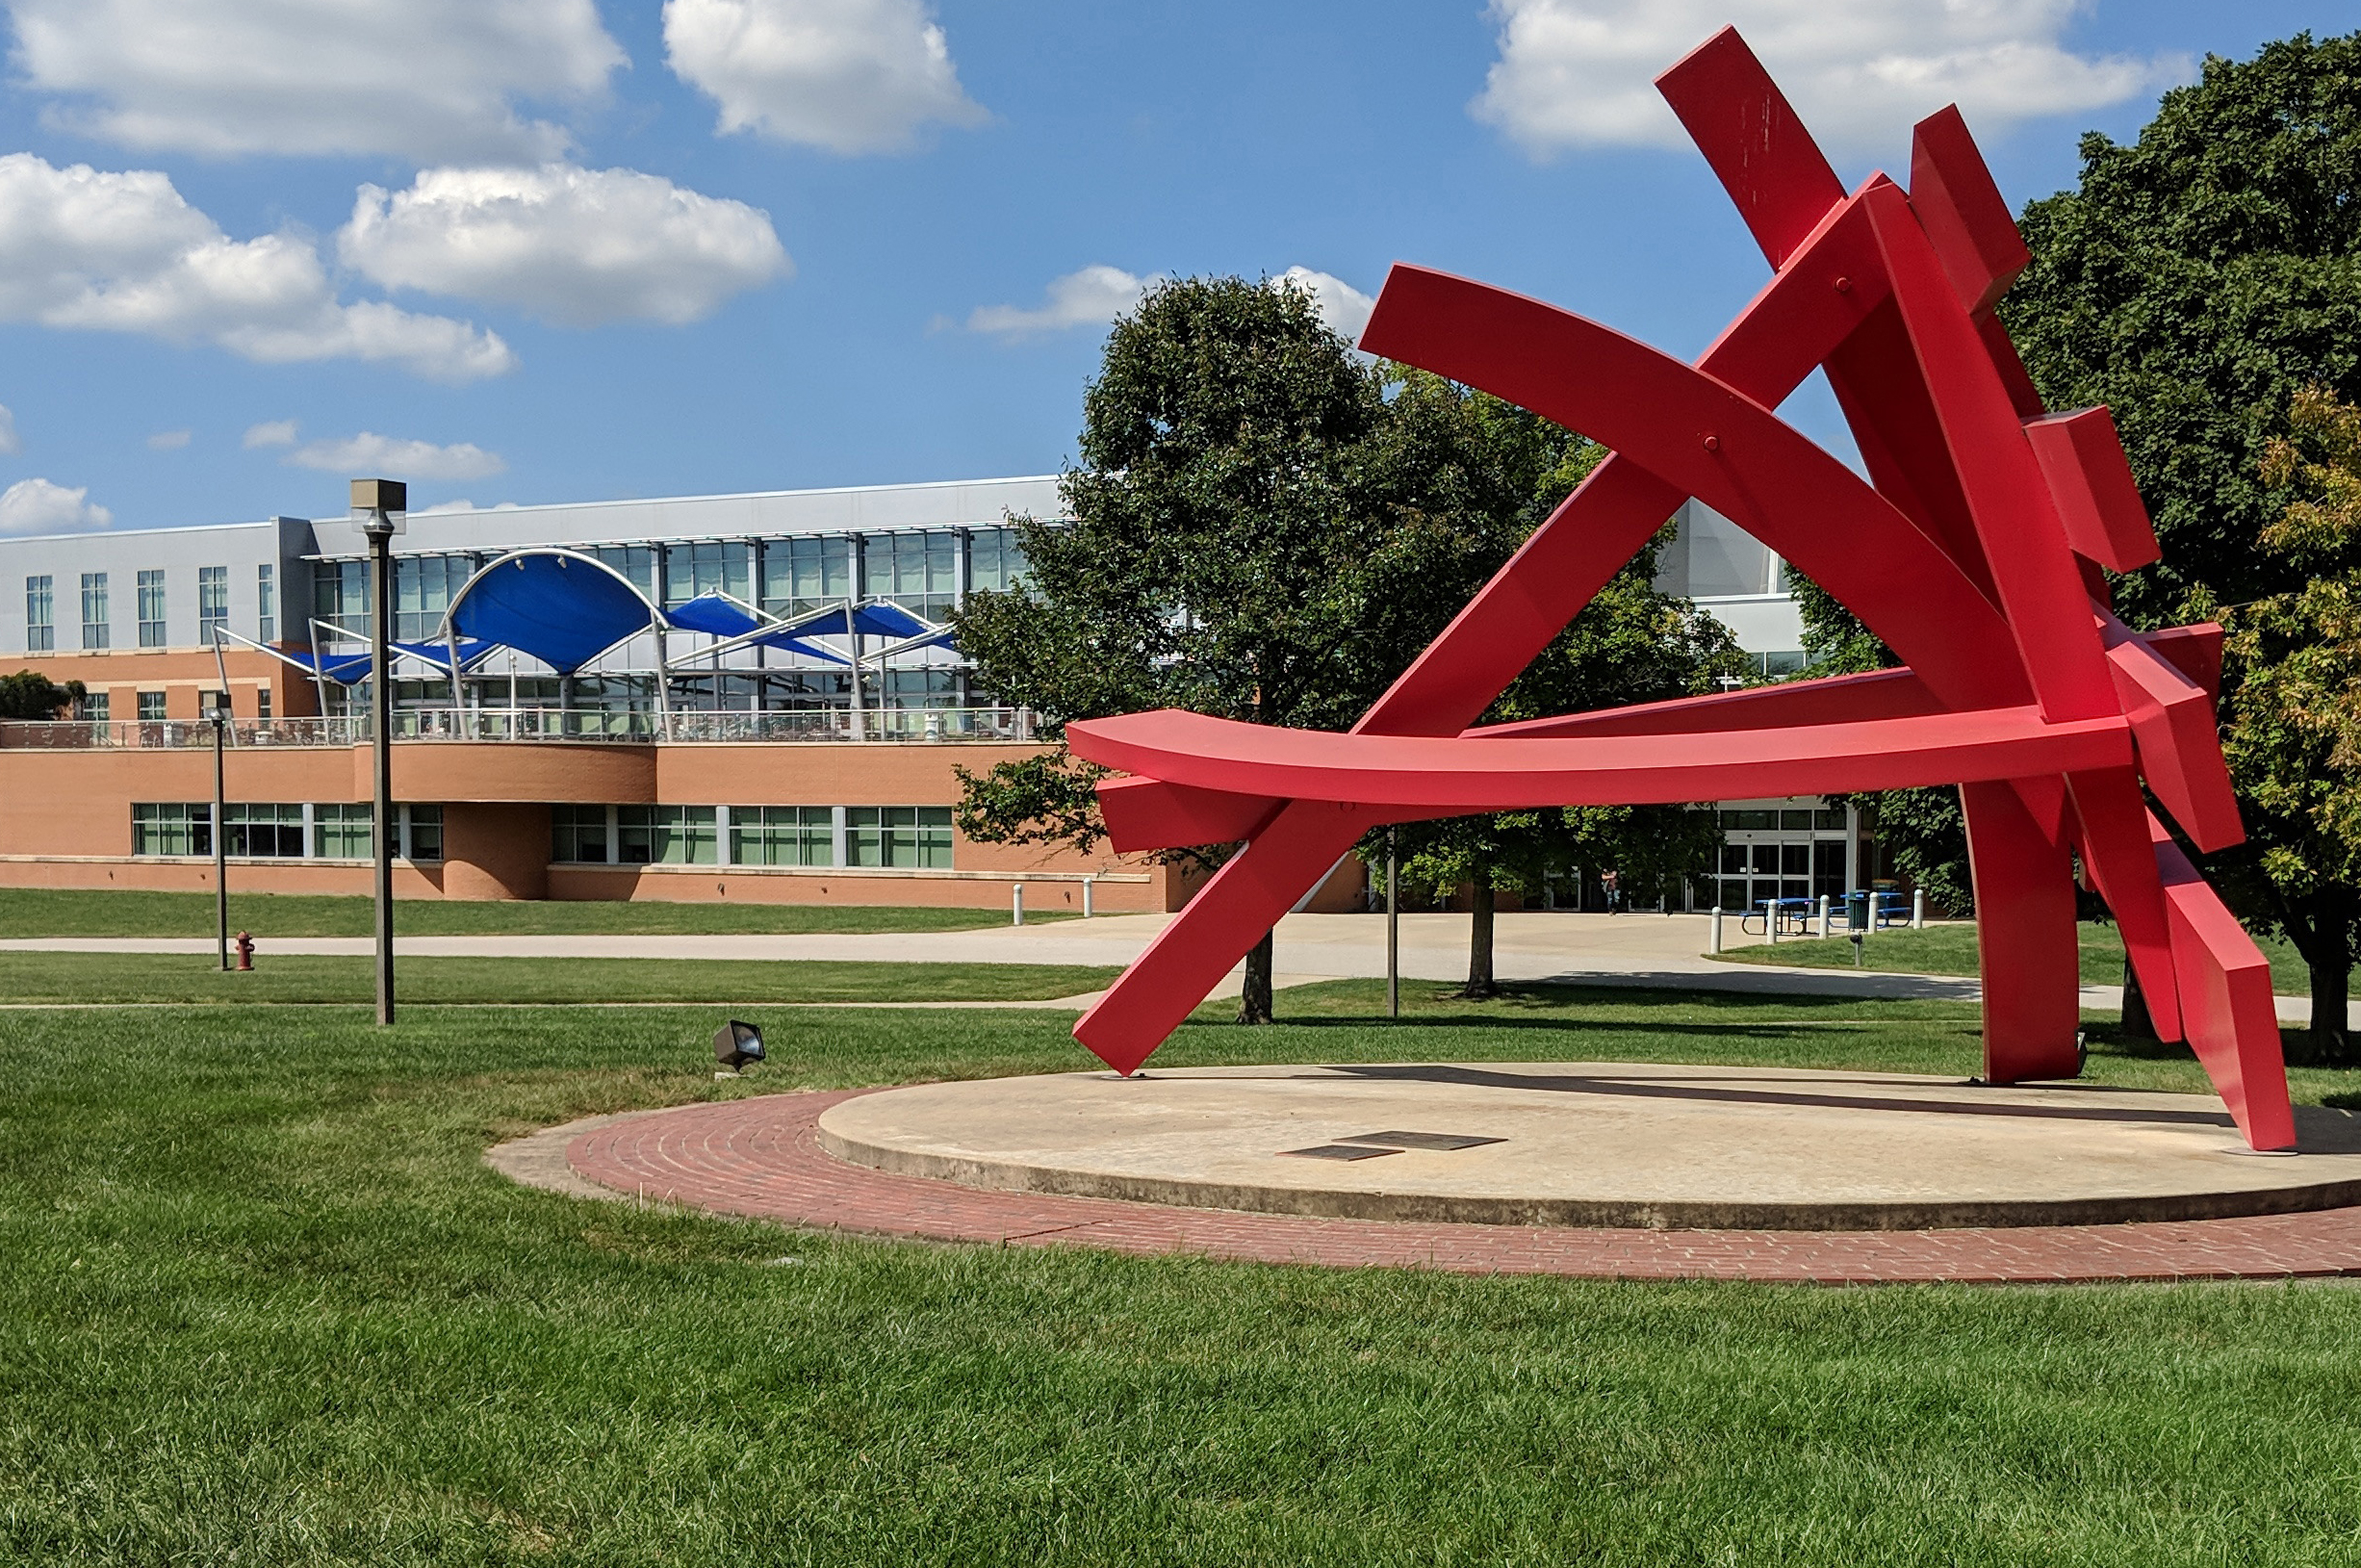 Photo of Michael Dunbar's "Astro Treillage" sculpture and the Liberal Arts building on the Belleville campus.